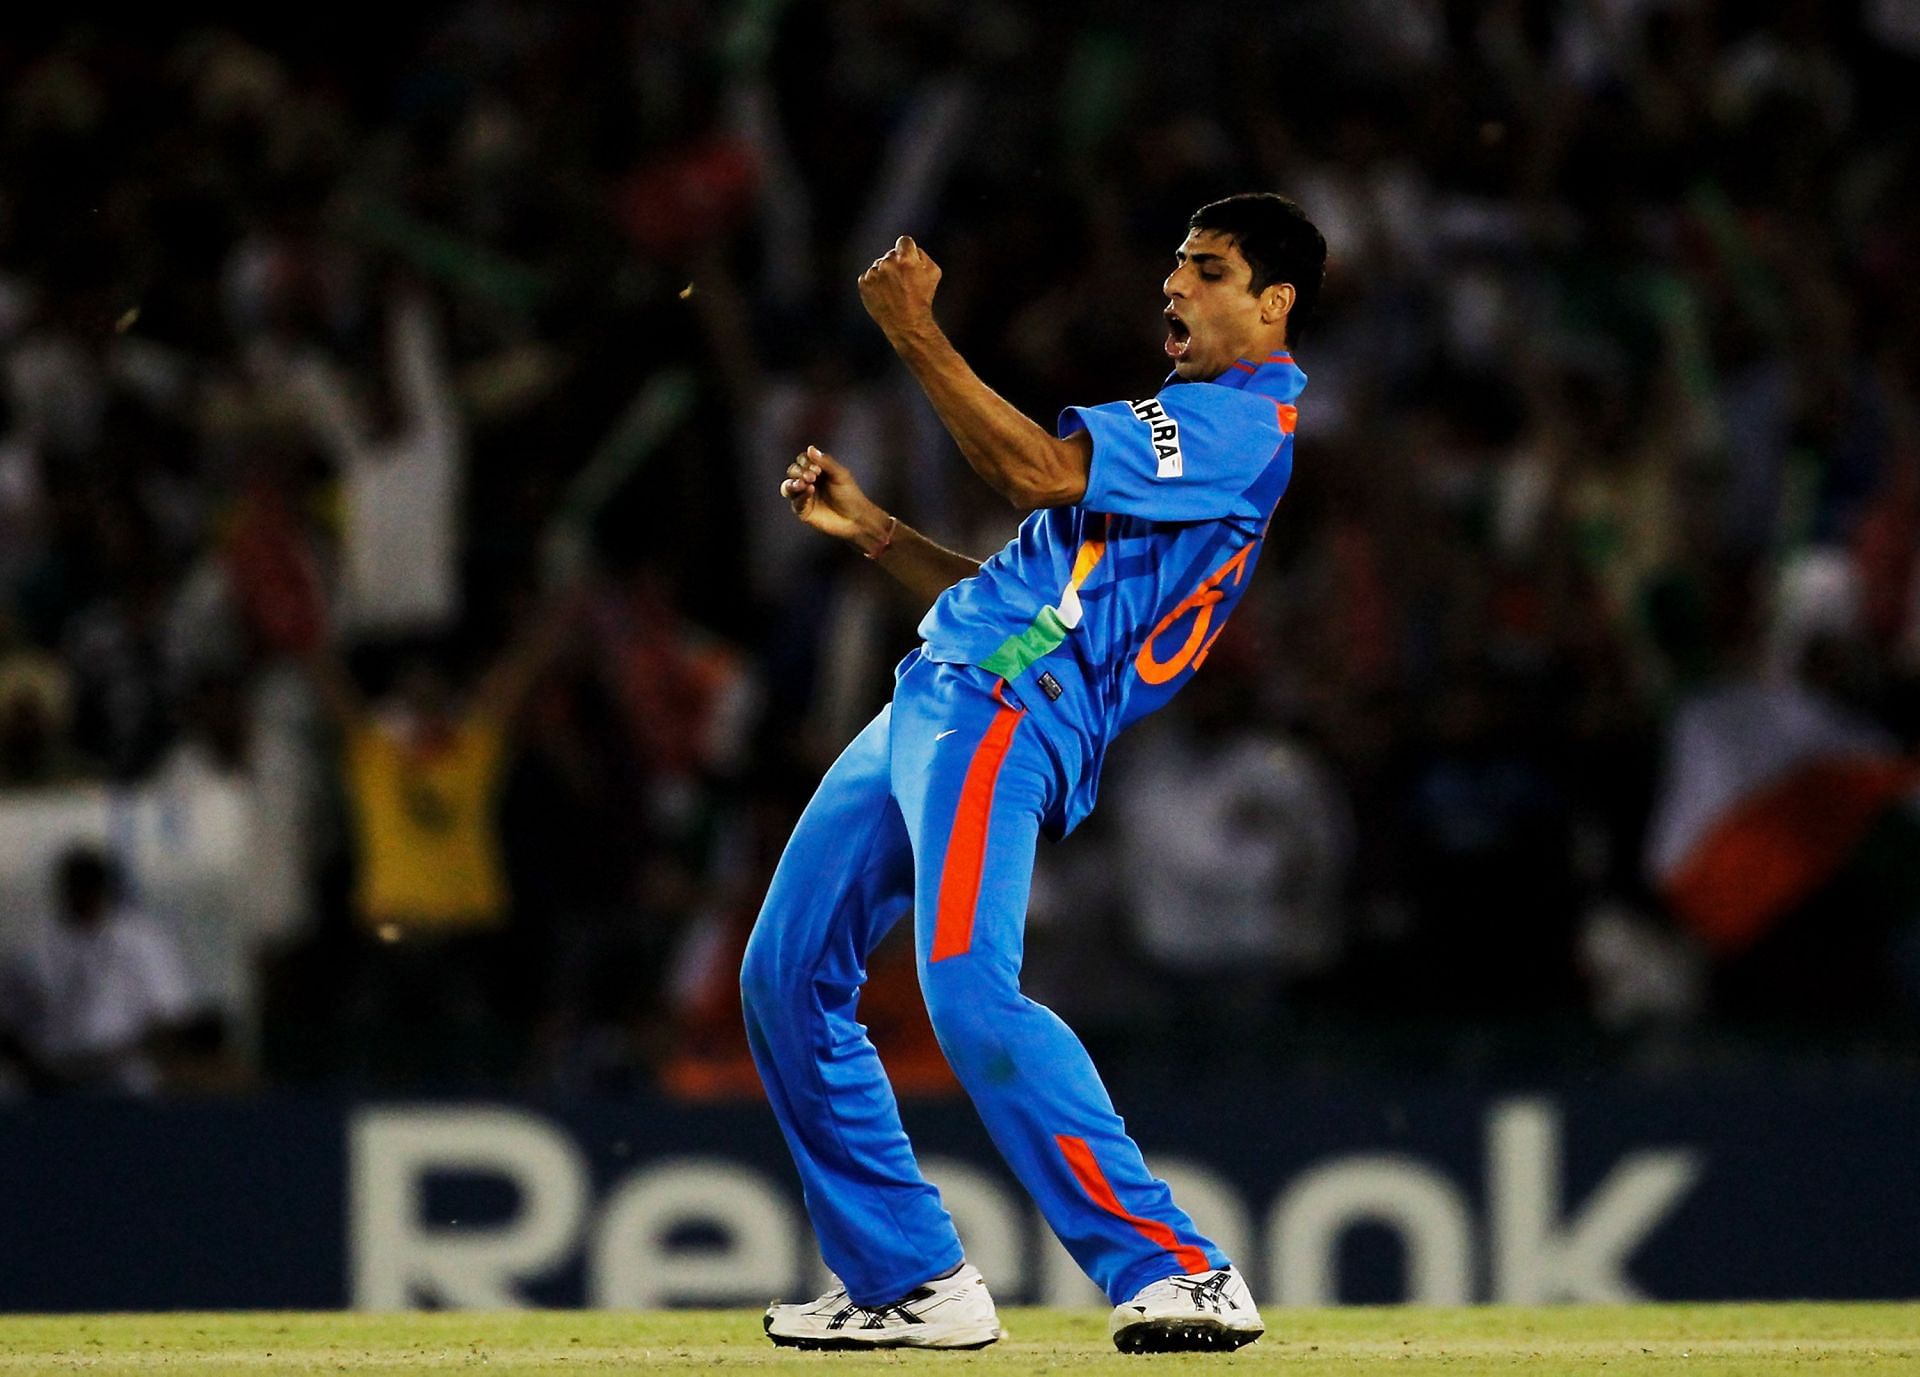 Pakistan v India - 2011 ICC World Cup Semi-Final (Image: Getty)